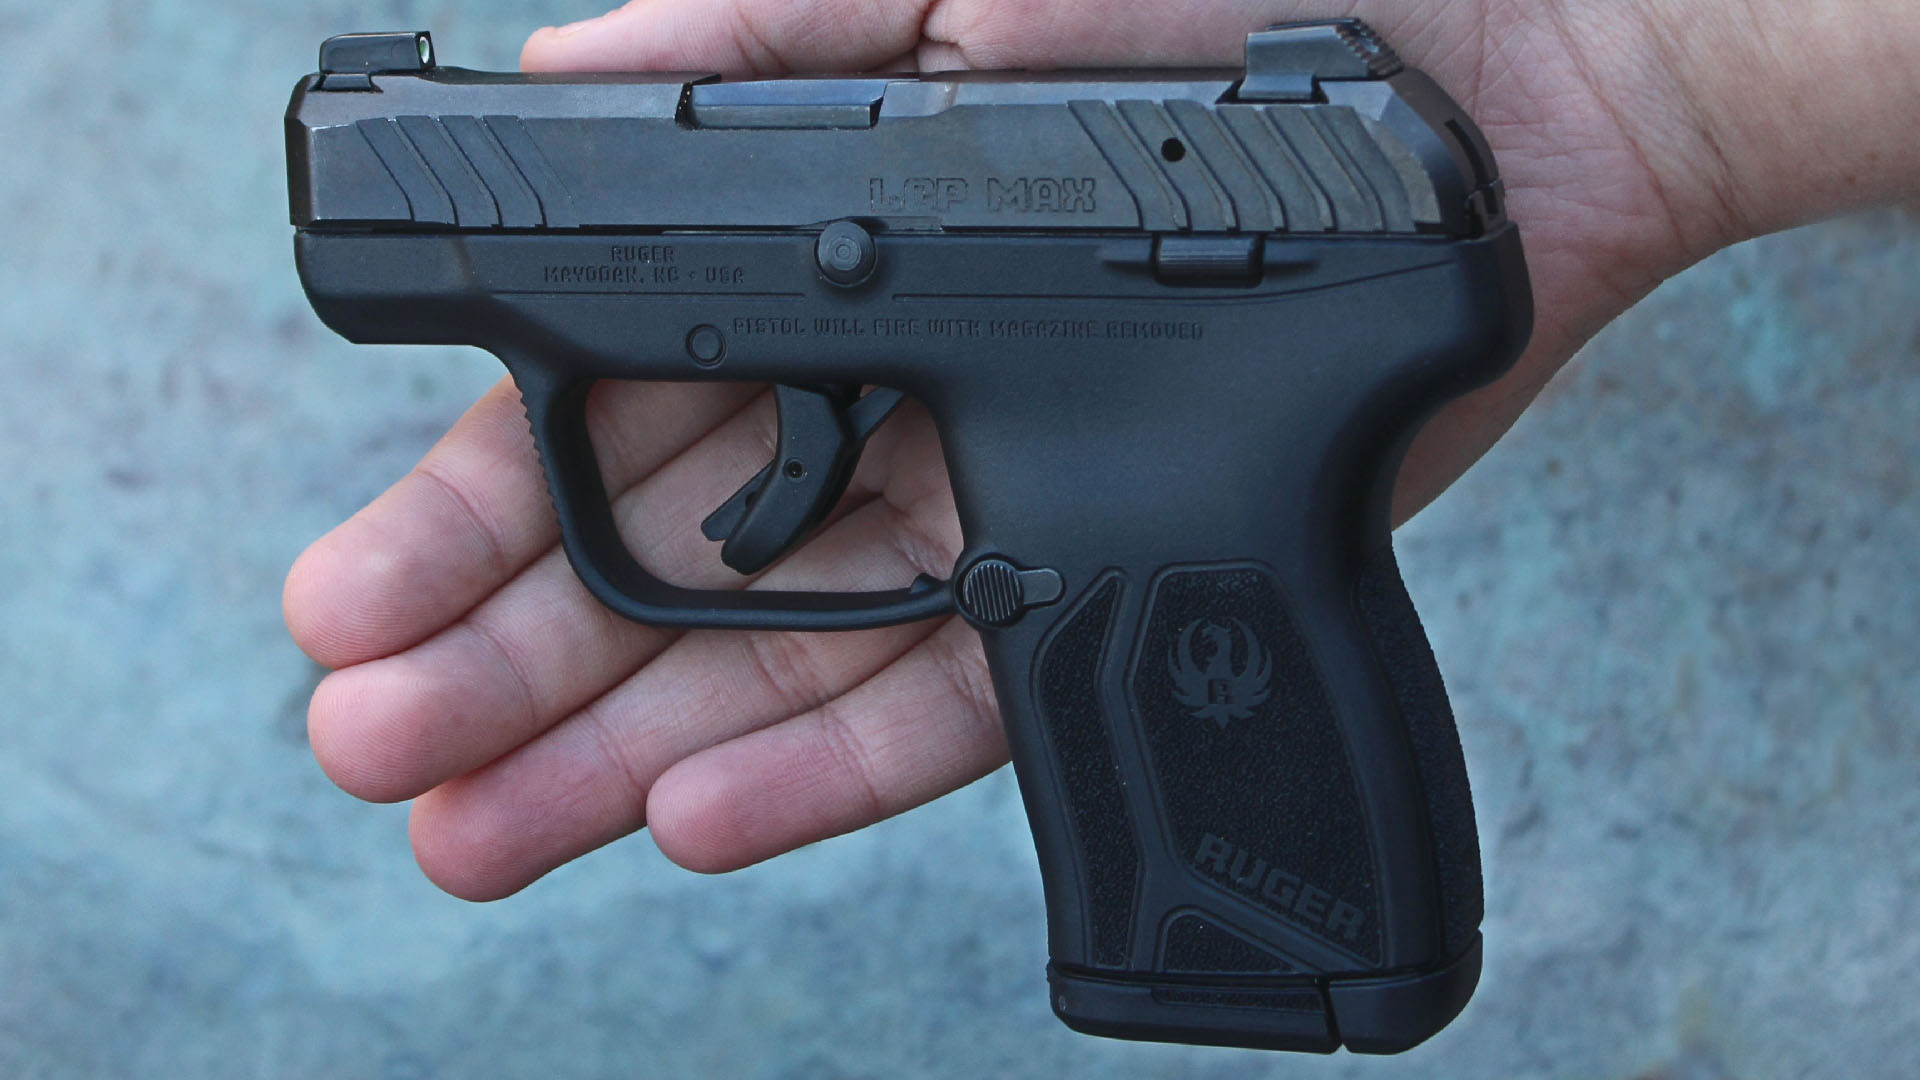 Pocket rockets: reliable .380 pistols for concealed carry - Photos -  Washington Times